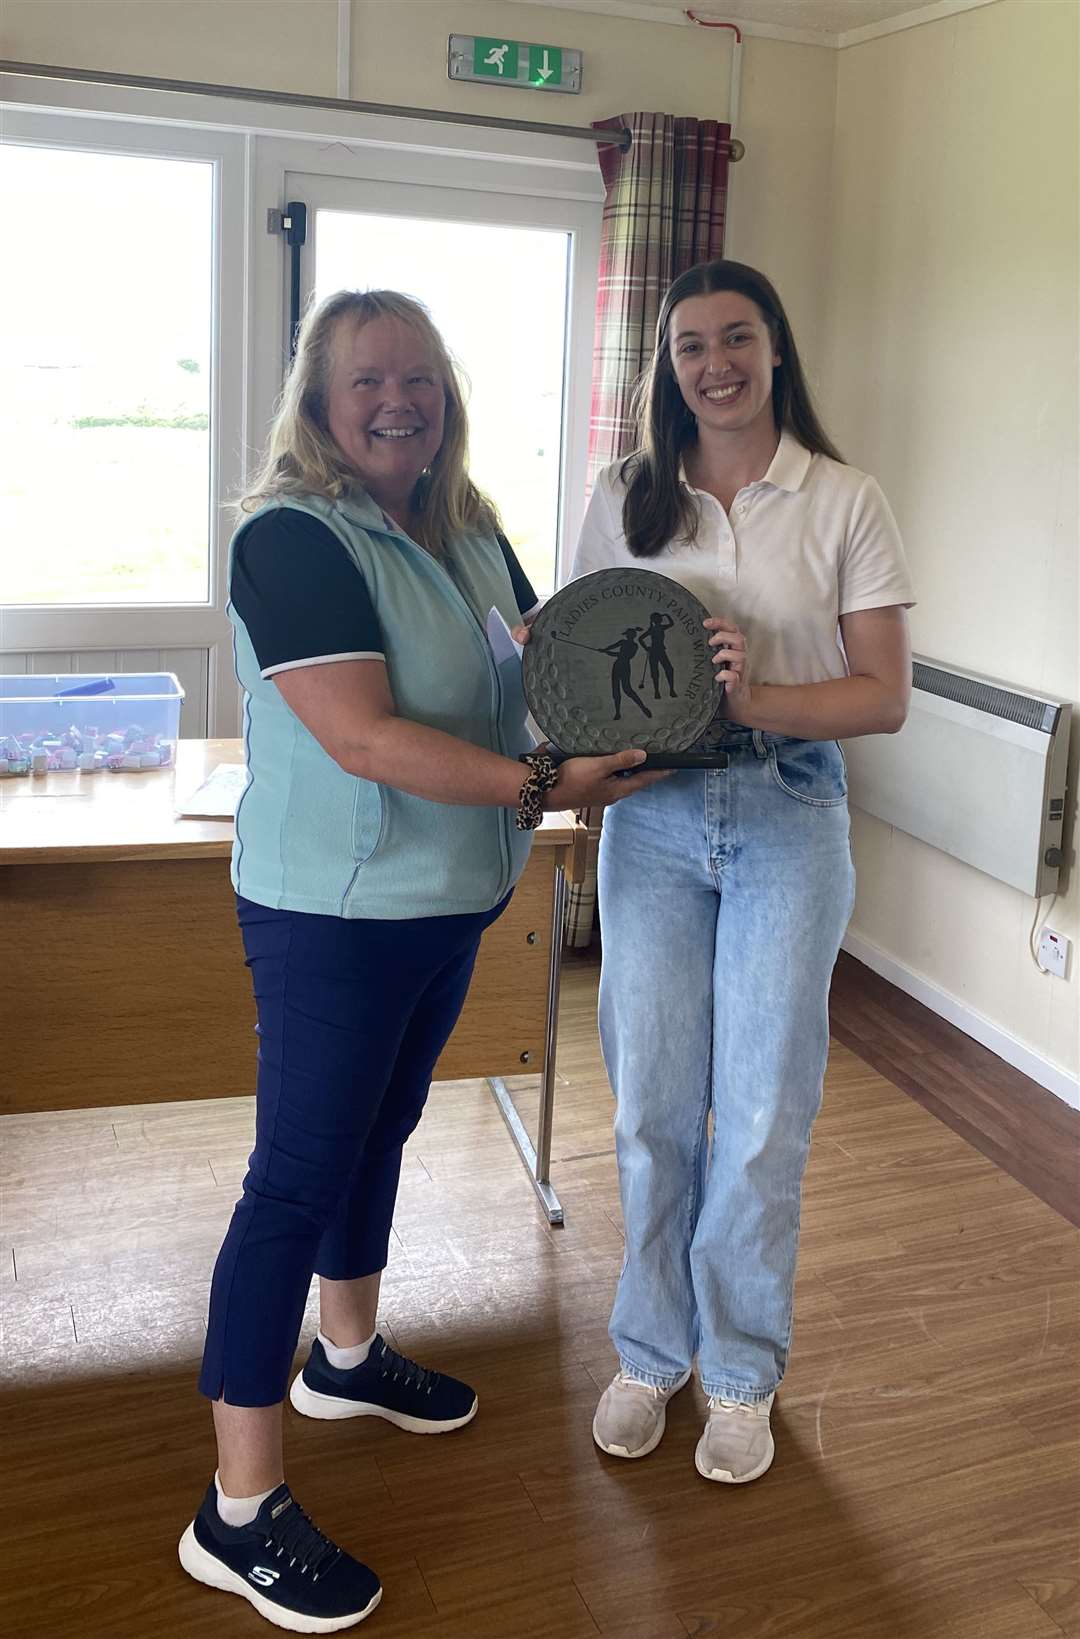 Jacqui Greig (left) and Eilidh Paterson, winners of the ladies' County Pairs competition.